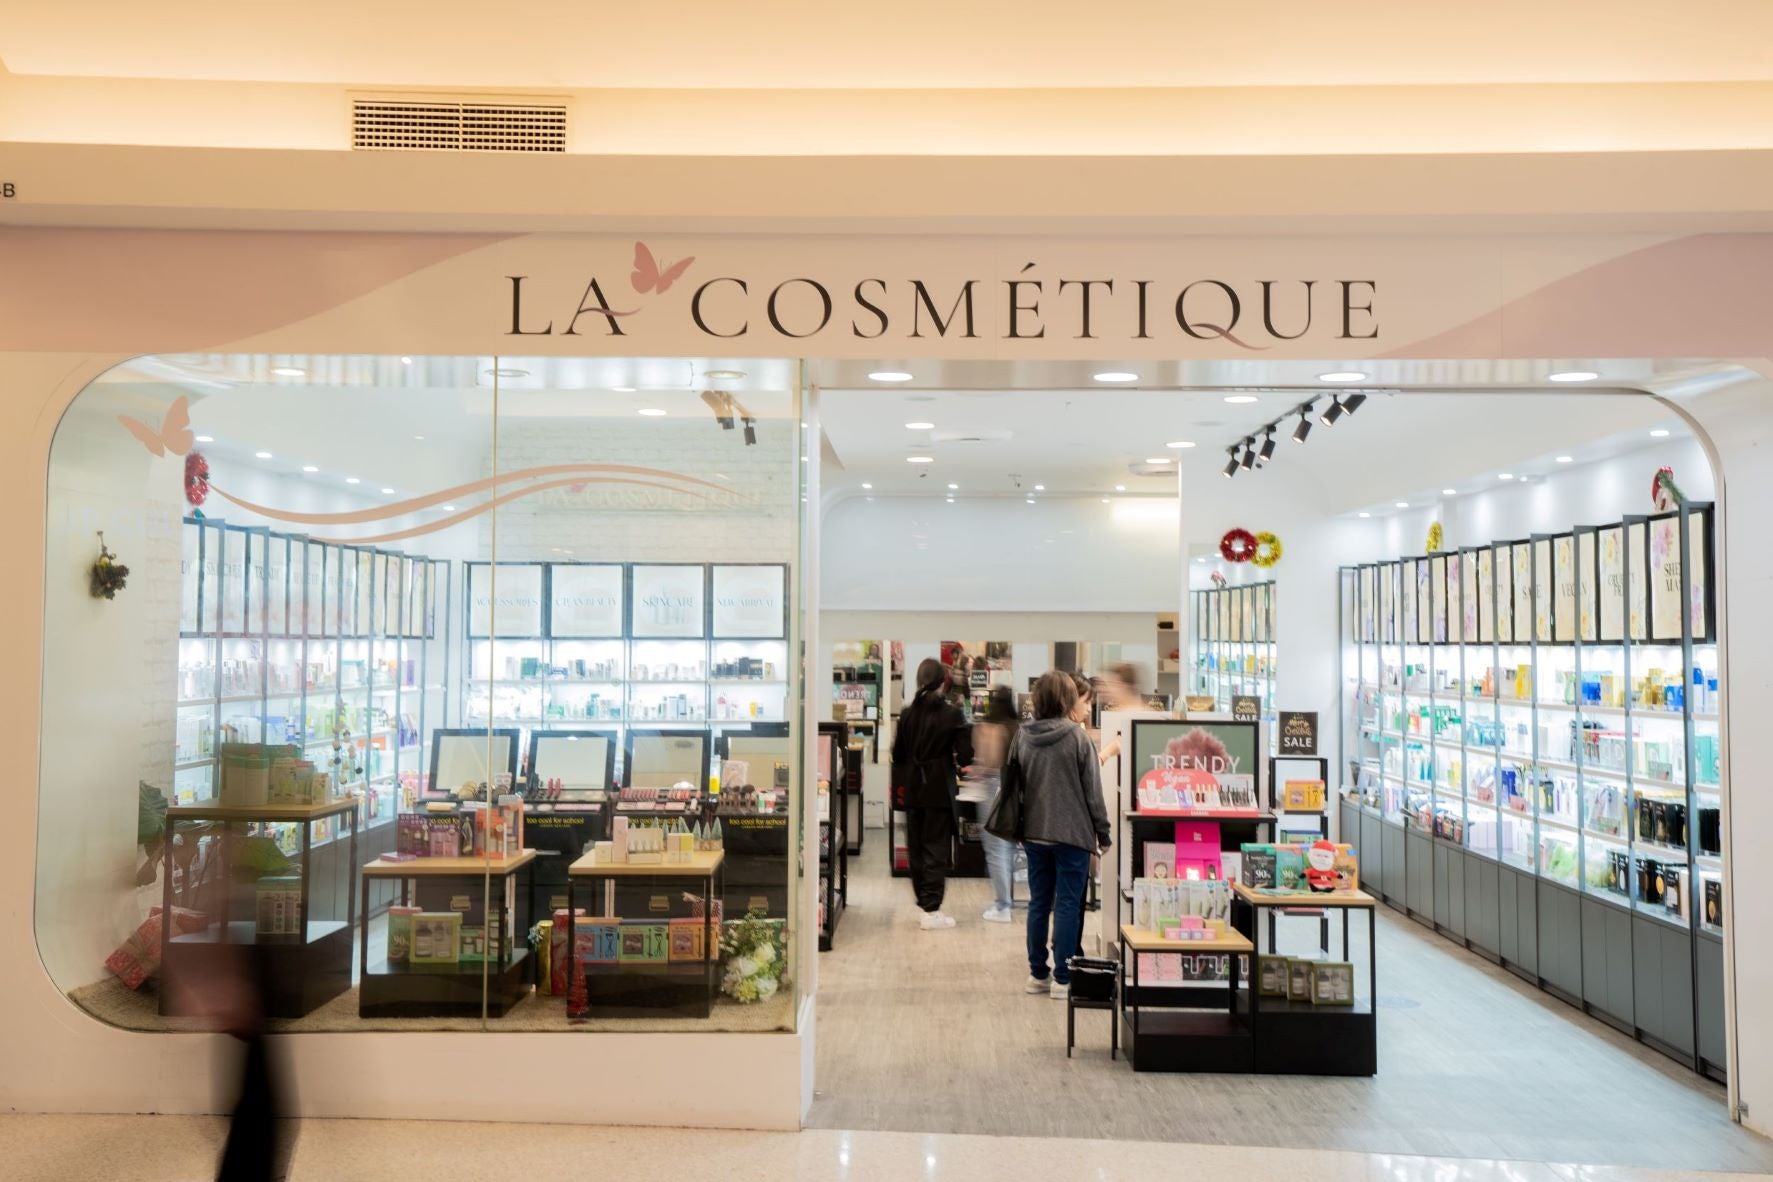 La Cosmetique storefront in Castle Towers Shopping Centre